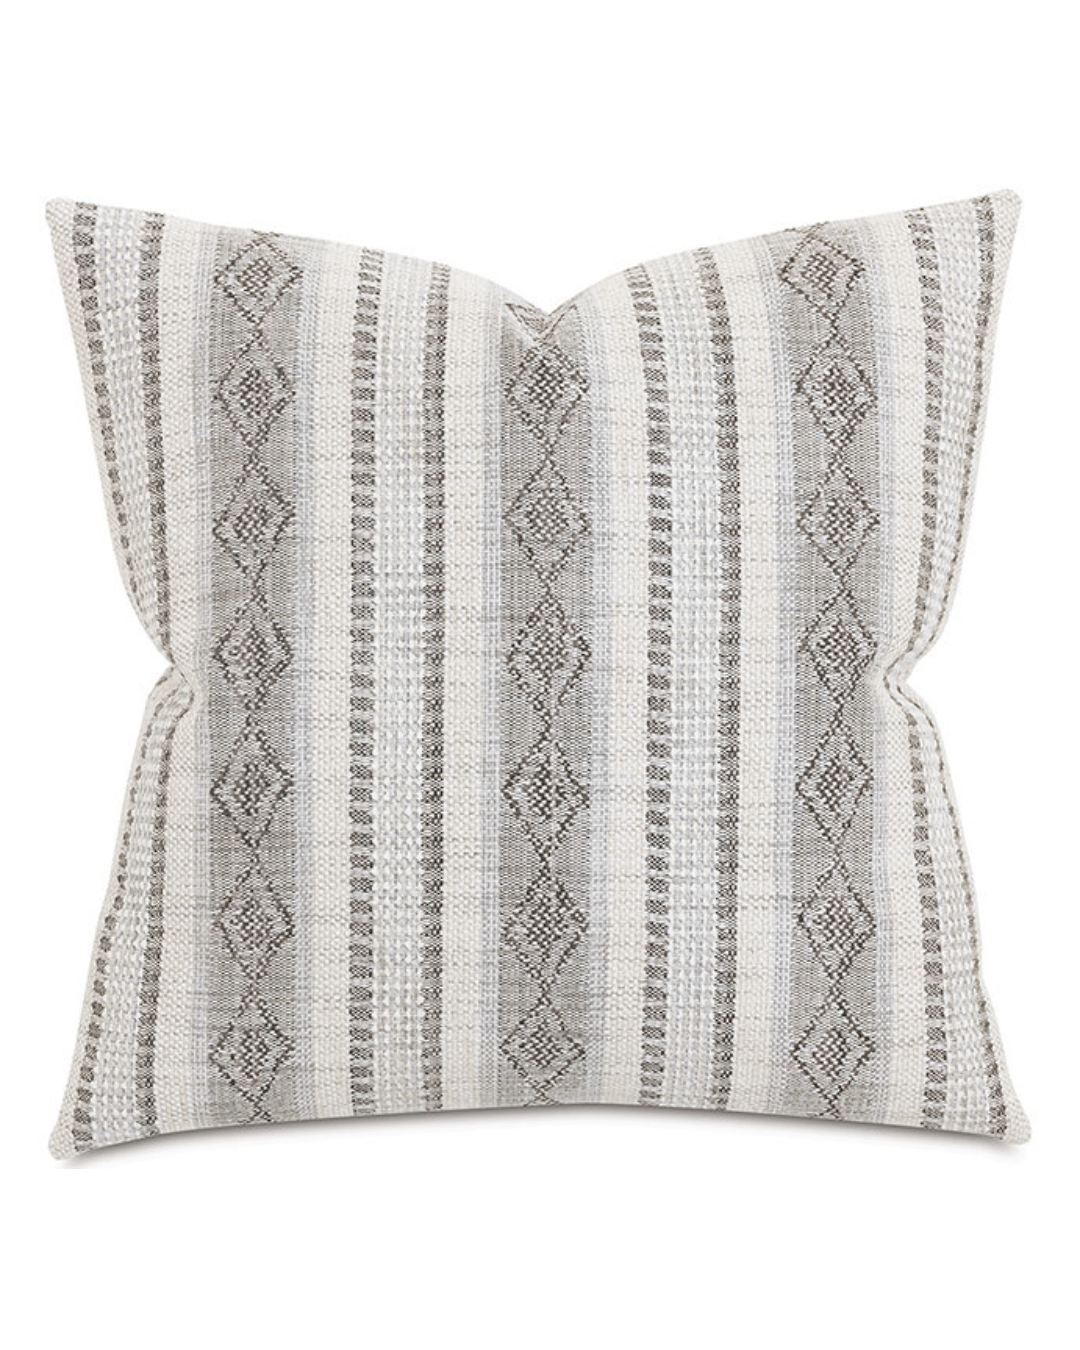 A decorative throw pillow with a patterned design of vertical gray and white stripes, featuring rows of intricate, diamond-shaped motifs. The pillow has a textured fabric, giving it an elegant and modern look. Opt for the Eastern Accents DIAMOND EURO SHAM 27x27 to enhance its plush feel.